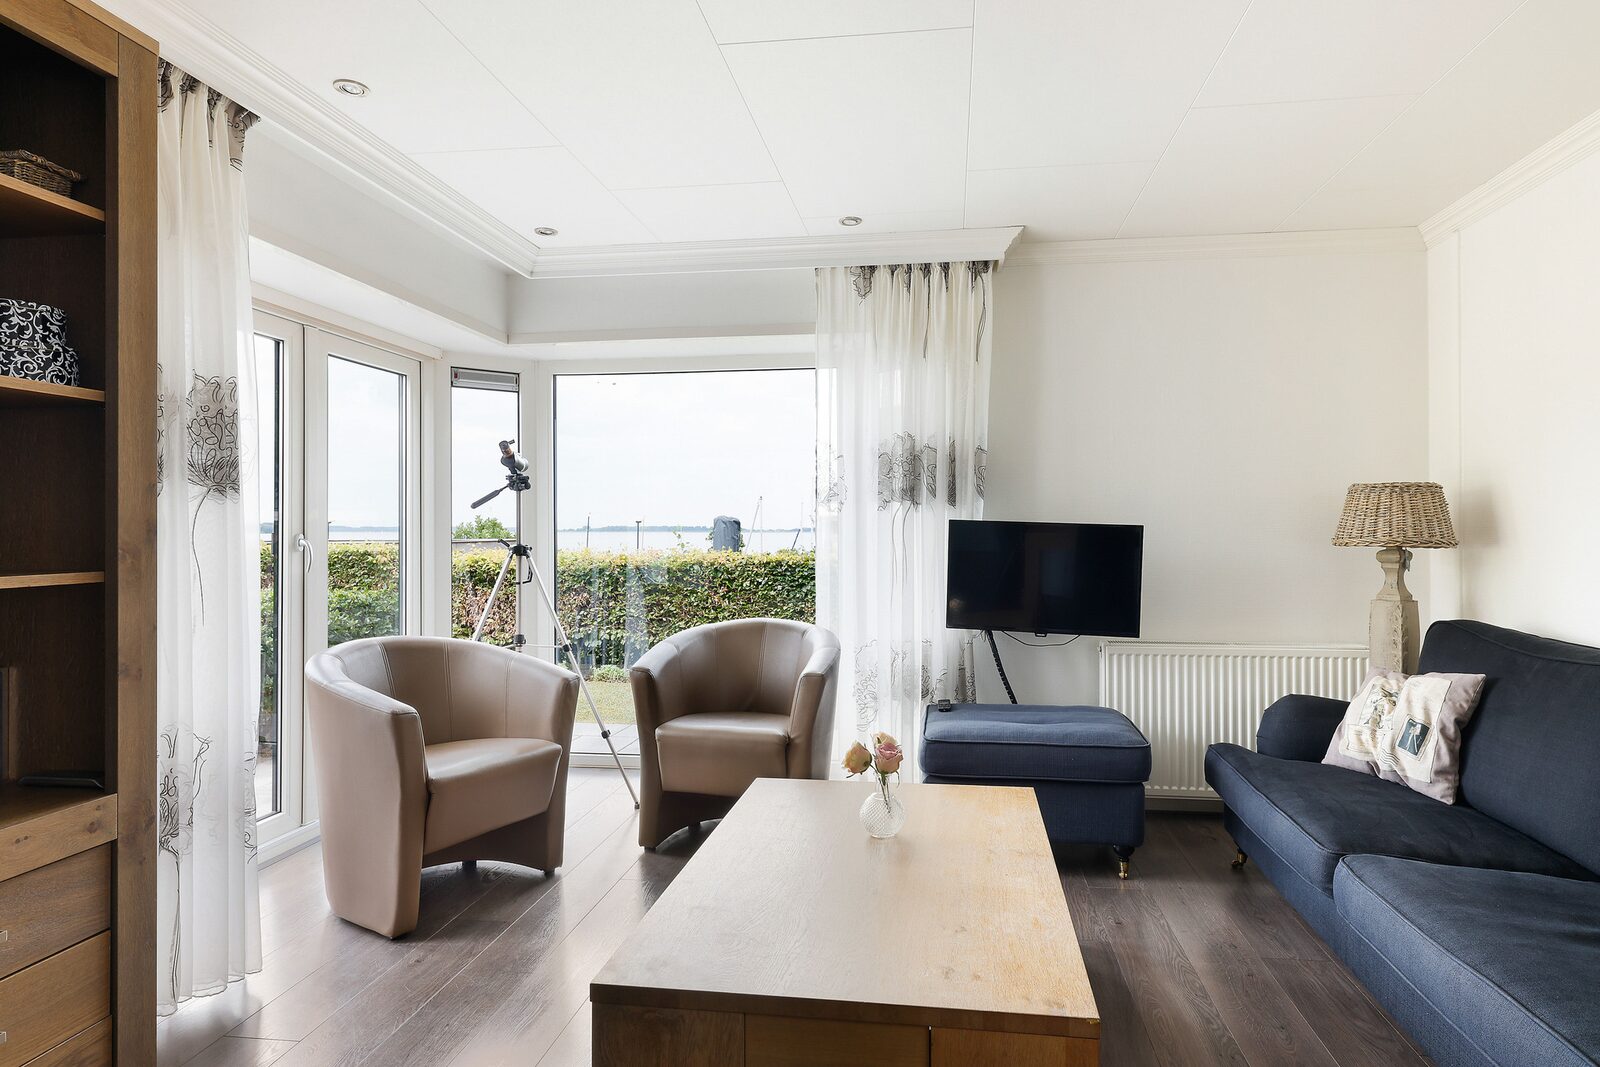 Accommodation for six persons with outdoor sauna & view of the Veluwemeer, three bedrooms